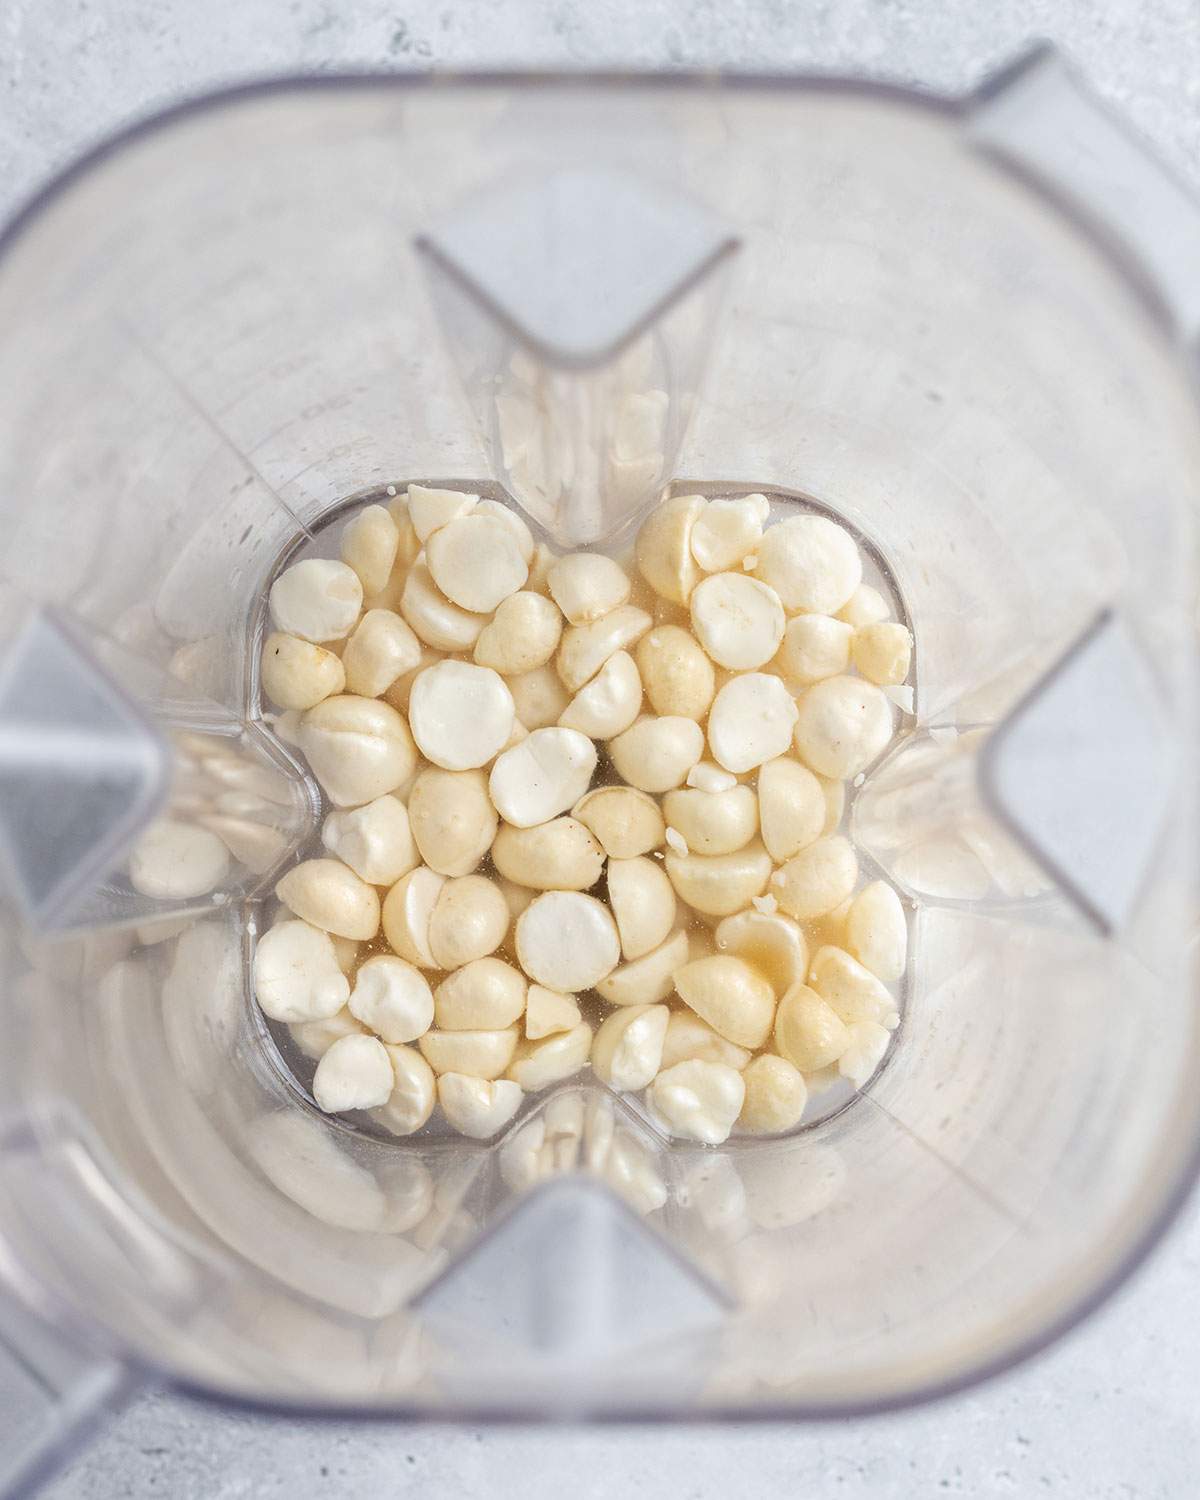 Soaked macadamia nuts in filtered water sitting at the bottom of a blender.